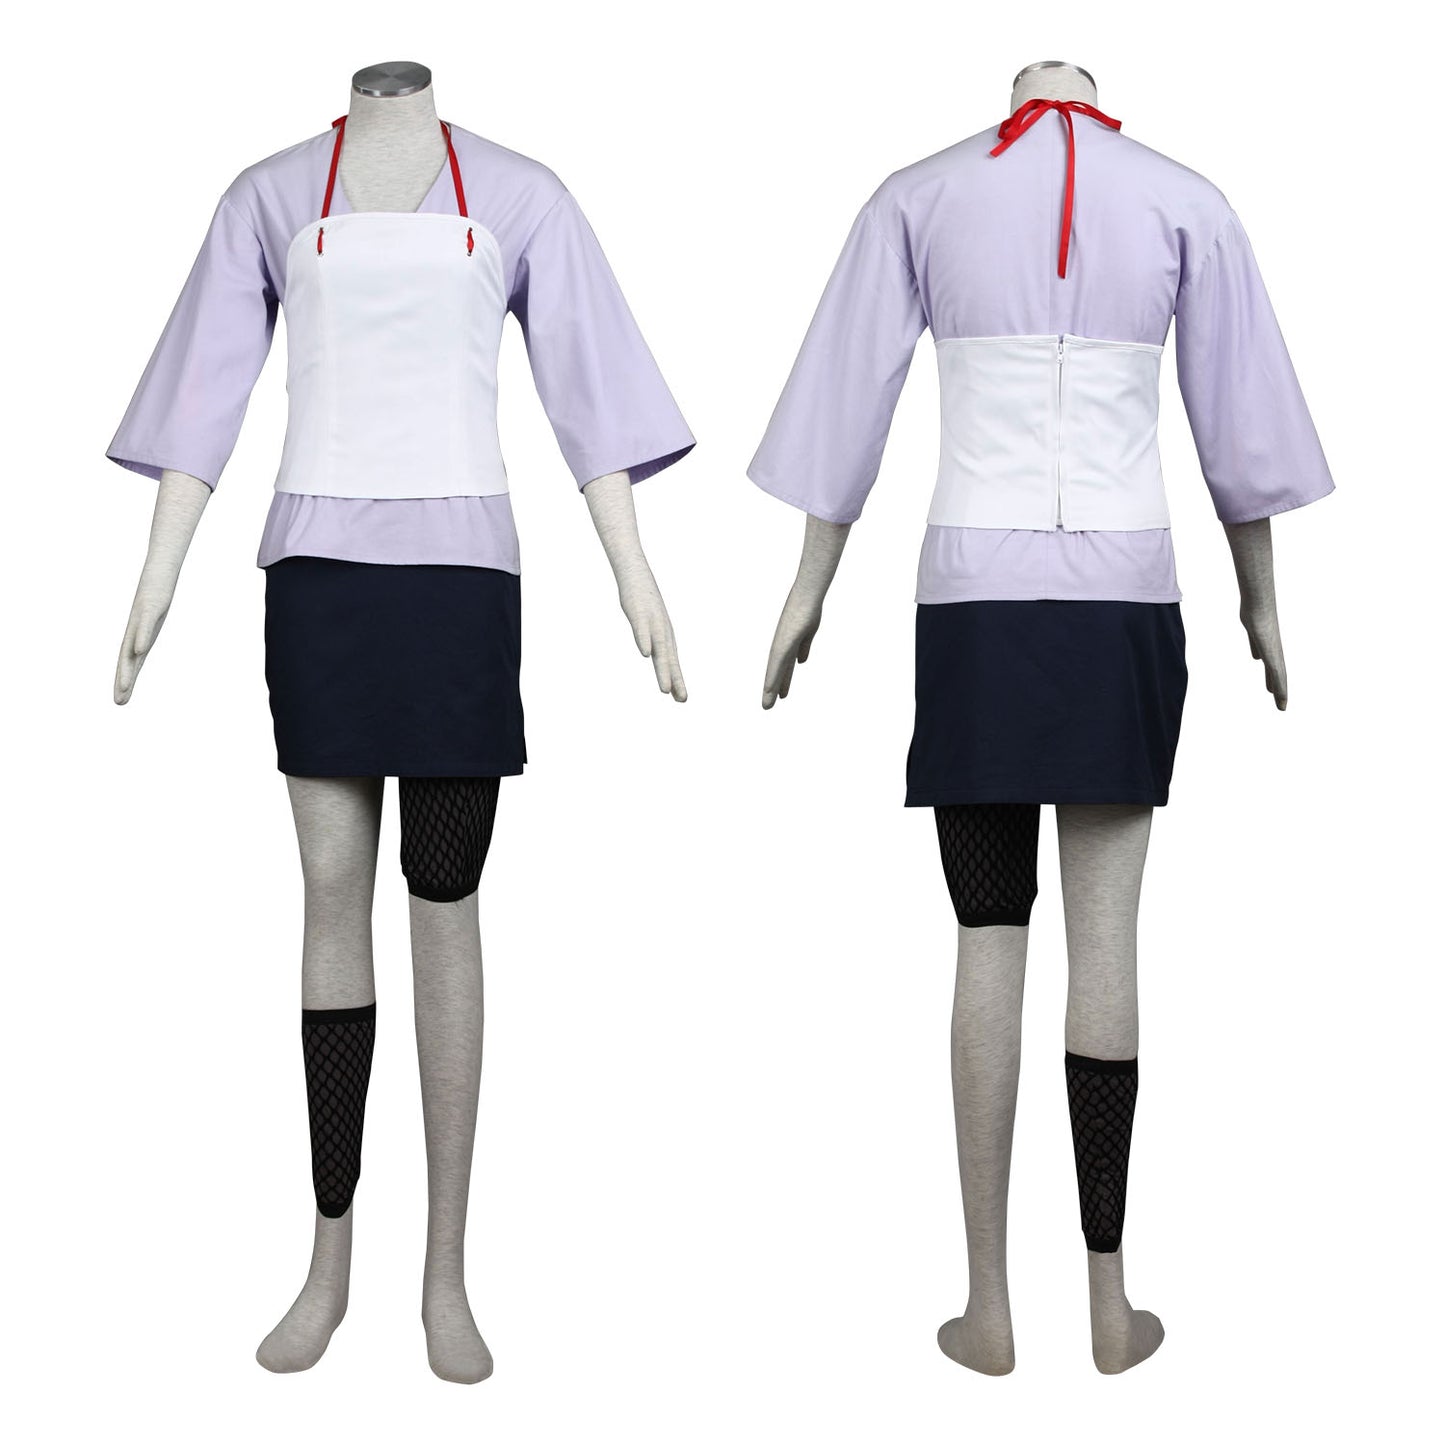 Naruto Costume Temari Cosplay full Outfit for Women and Kids